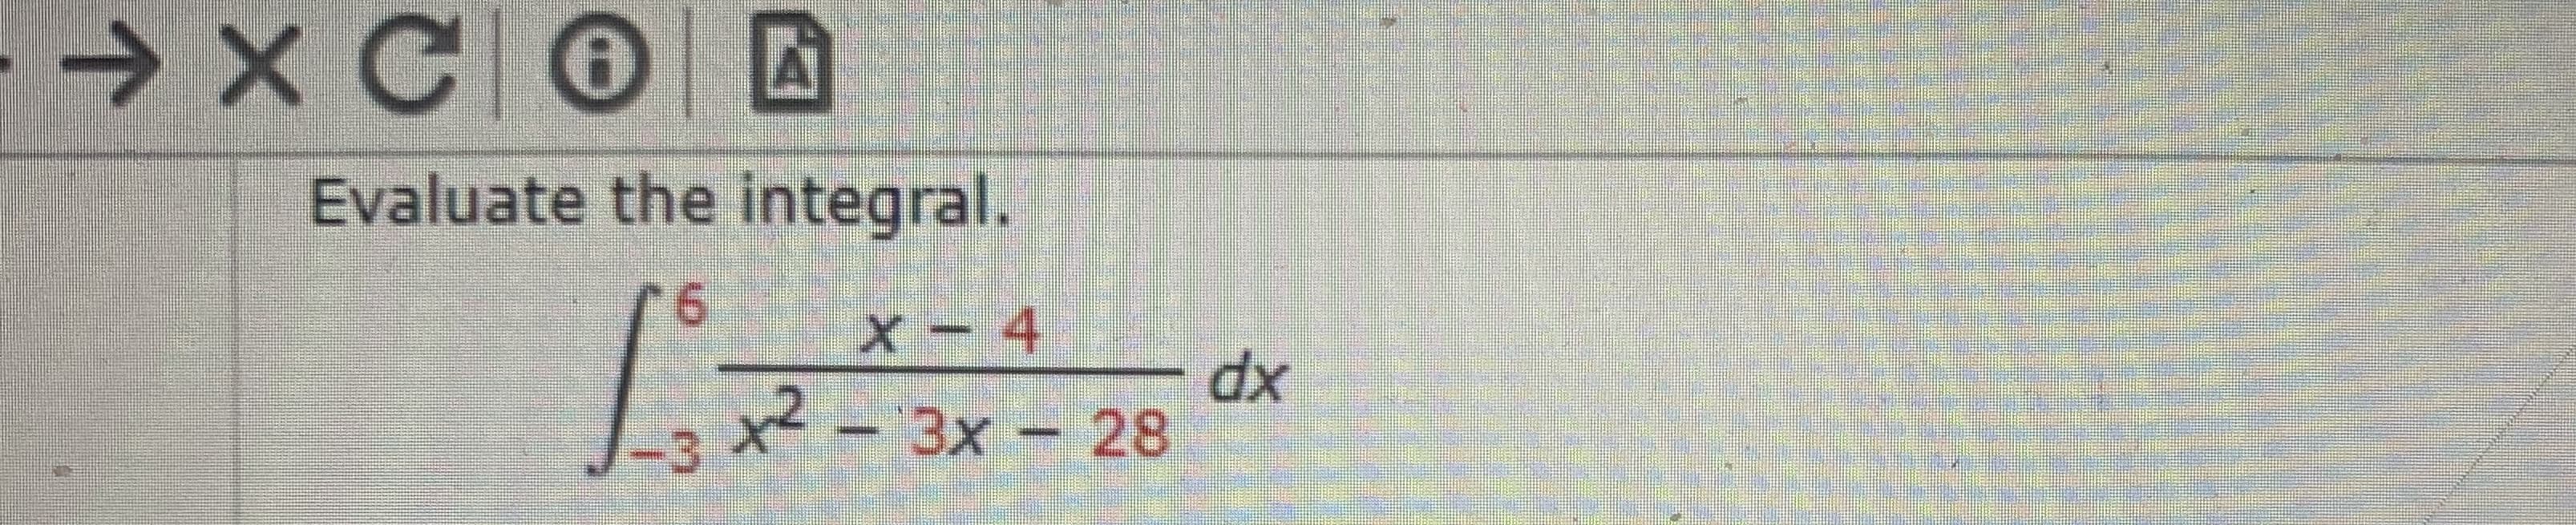 Evaluate the integral.
6.
X - 4
x² - 3x - 28
1-3
xp
